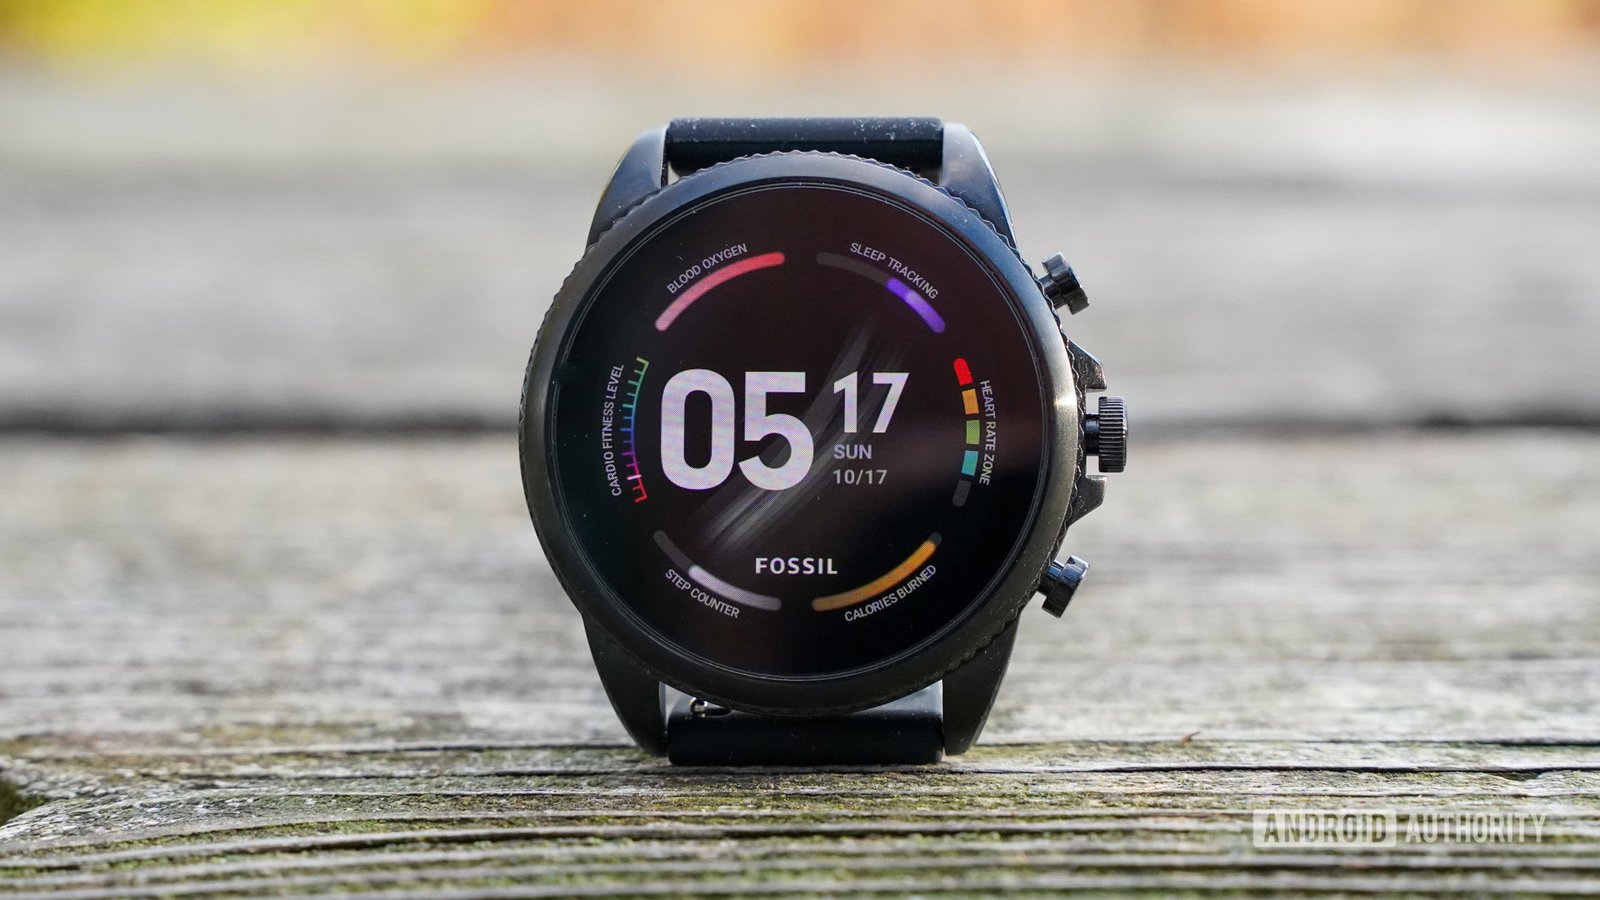 A great WearOS device for just $79!